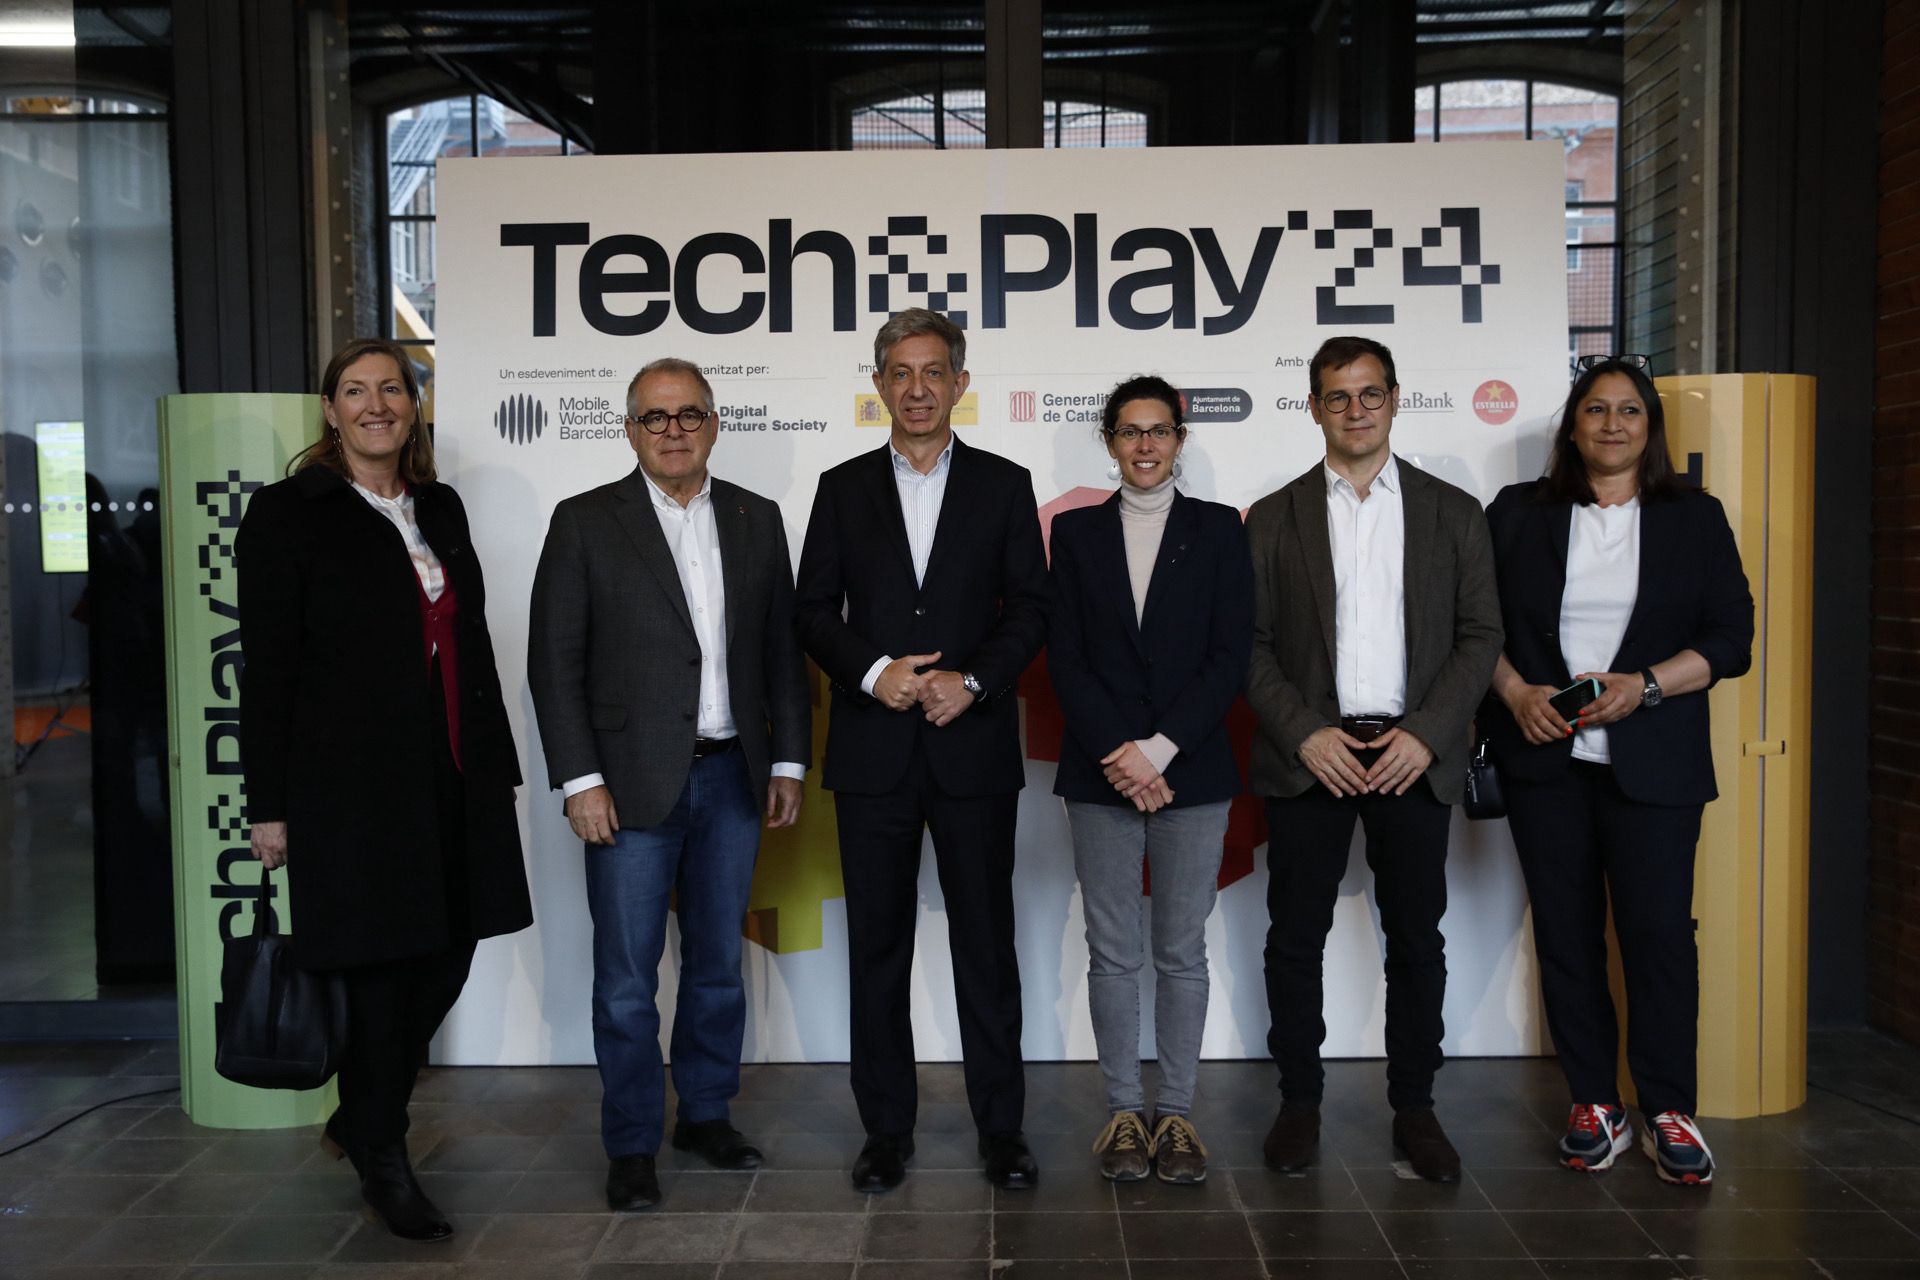 The second edition of Tech&Play, the MWCapital festival to bring technology closer to the public, kicks off